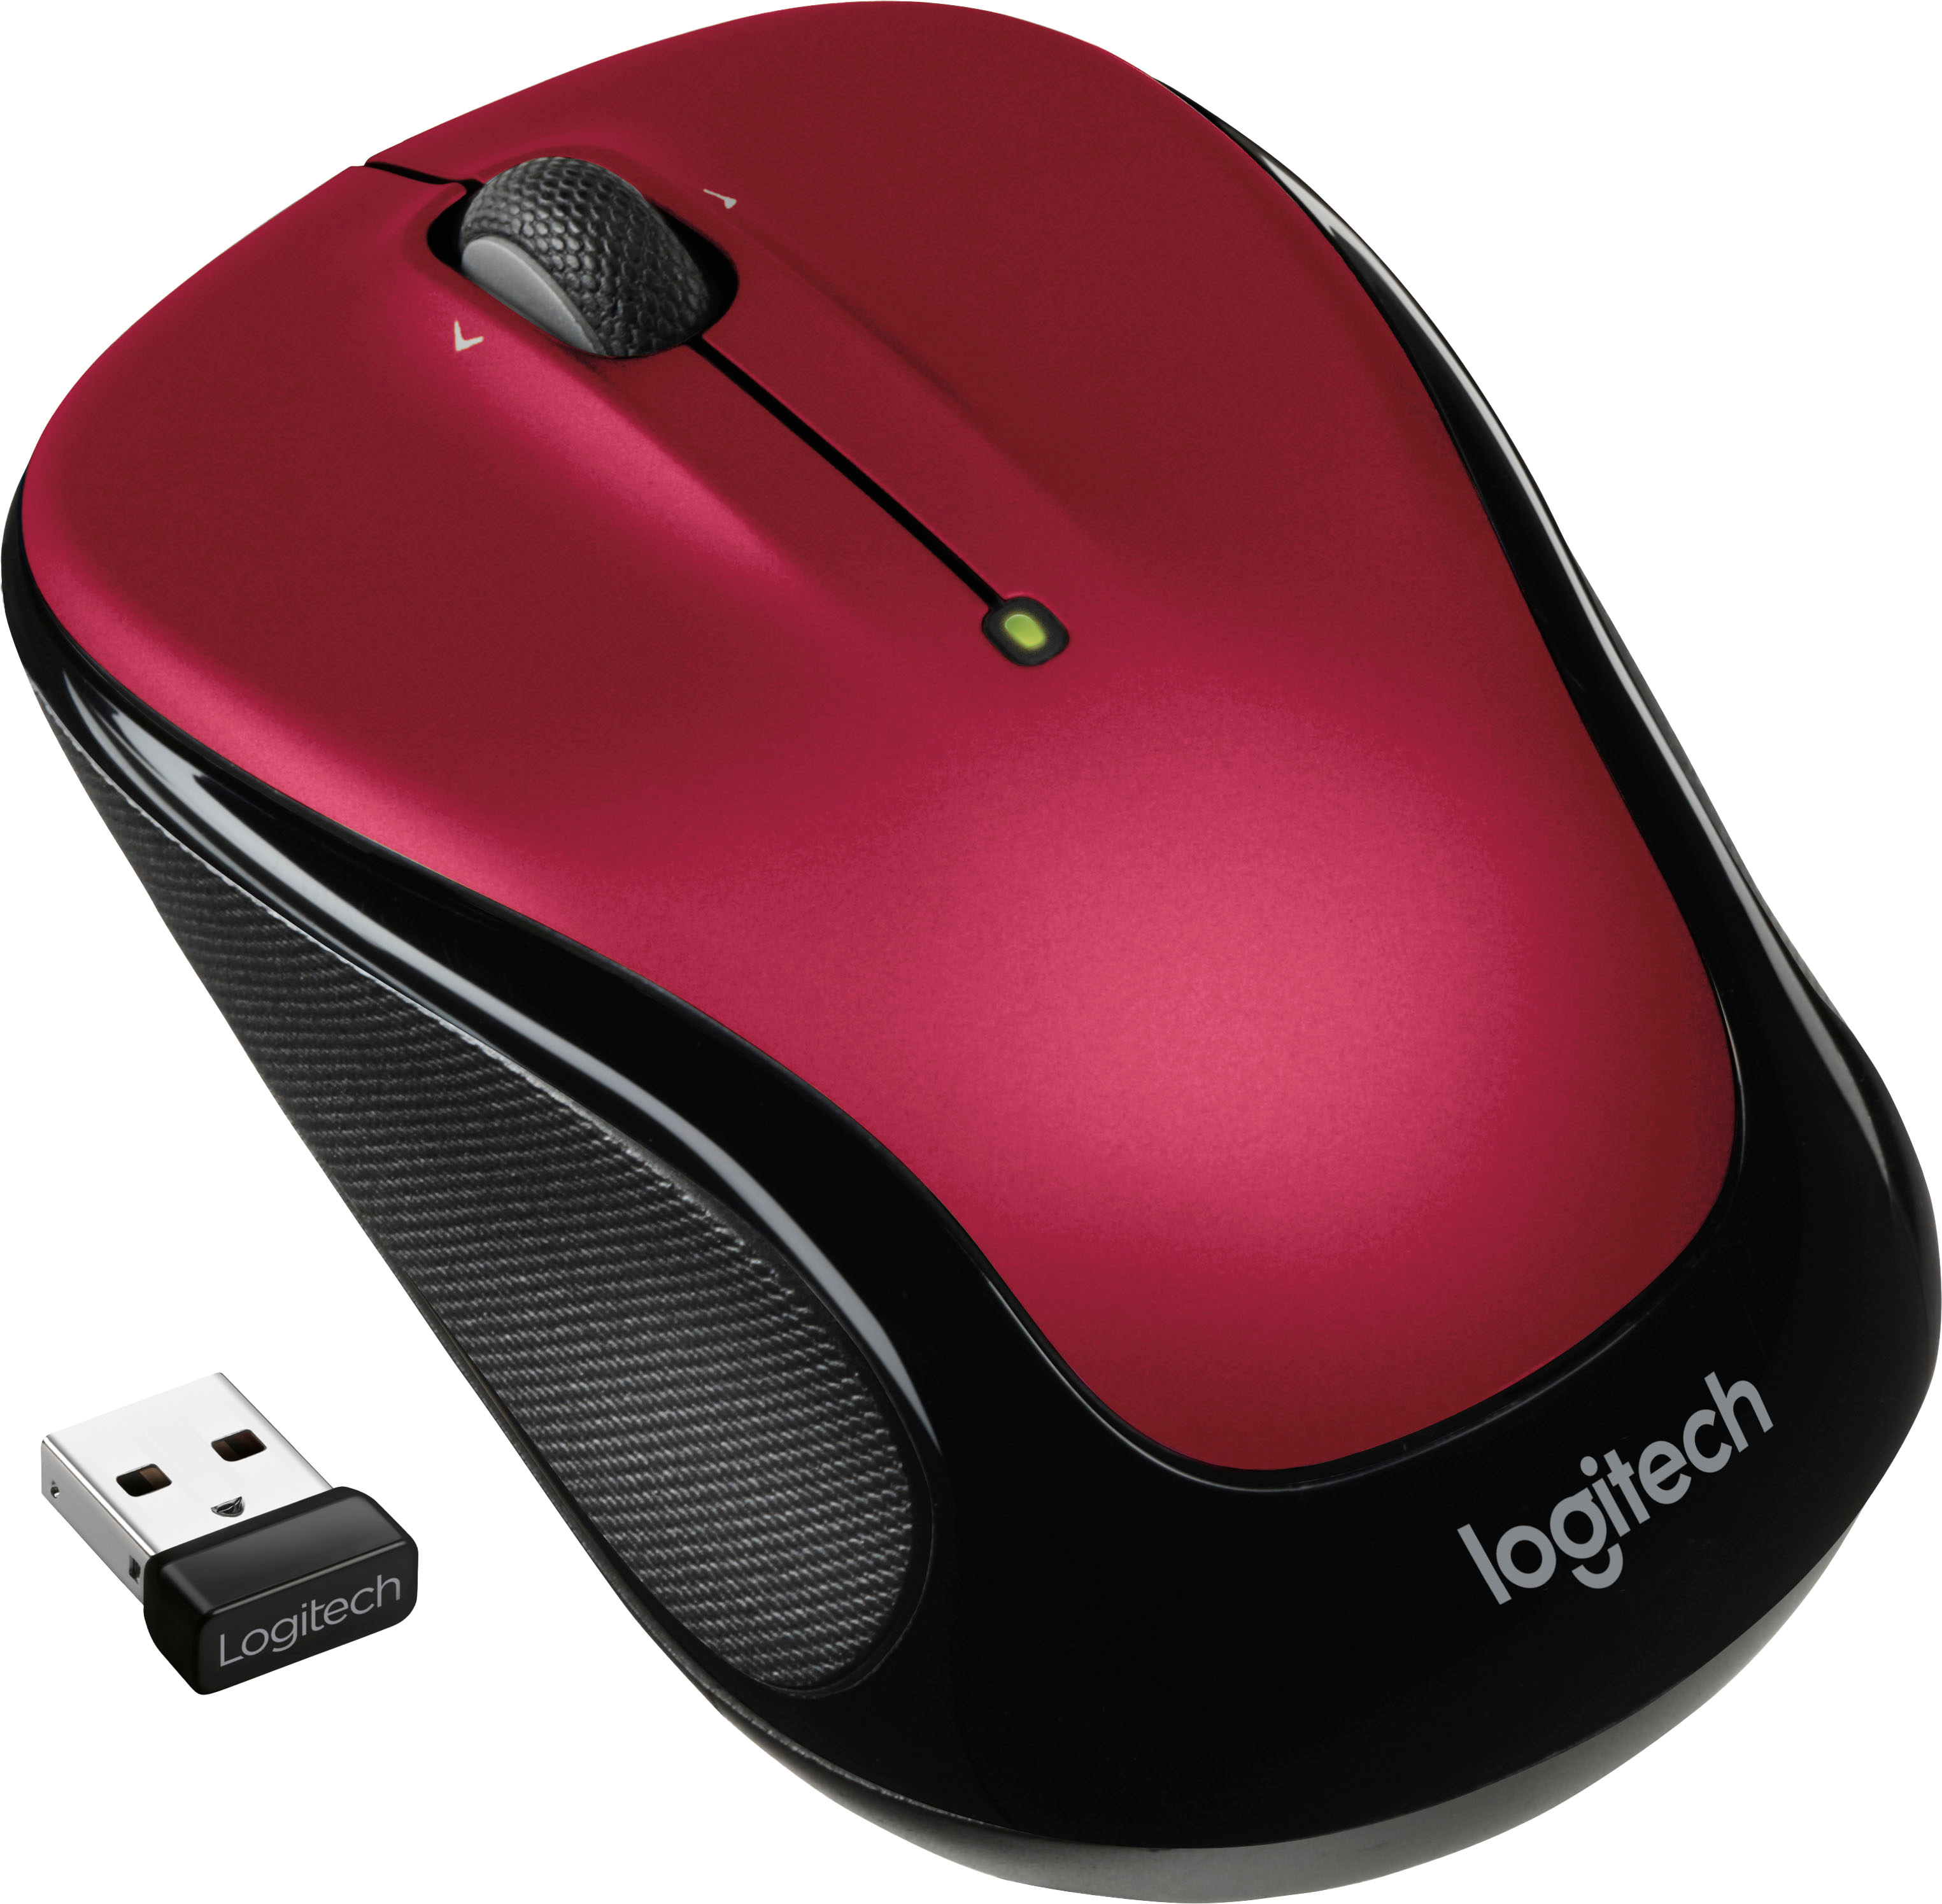 Logitech MX Anywhere 3 wireless mouse review: Small but mighty